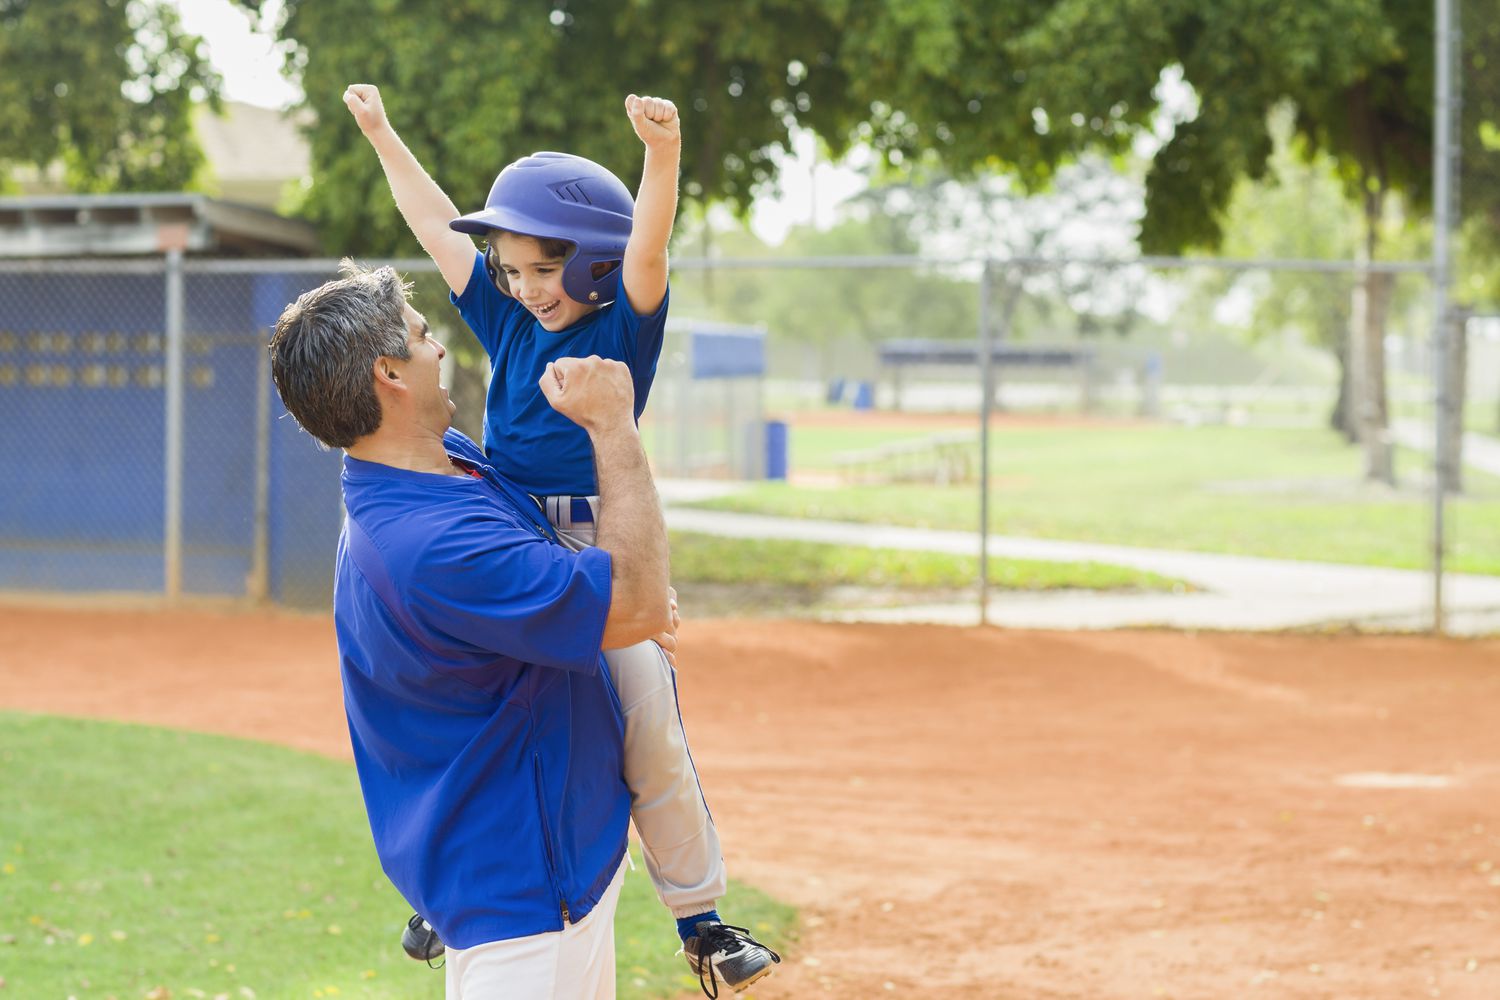 lessons learned by sports parents